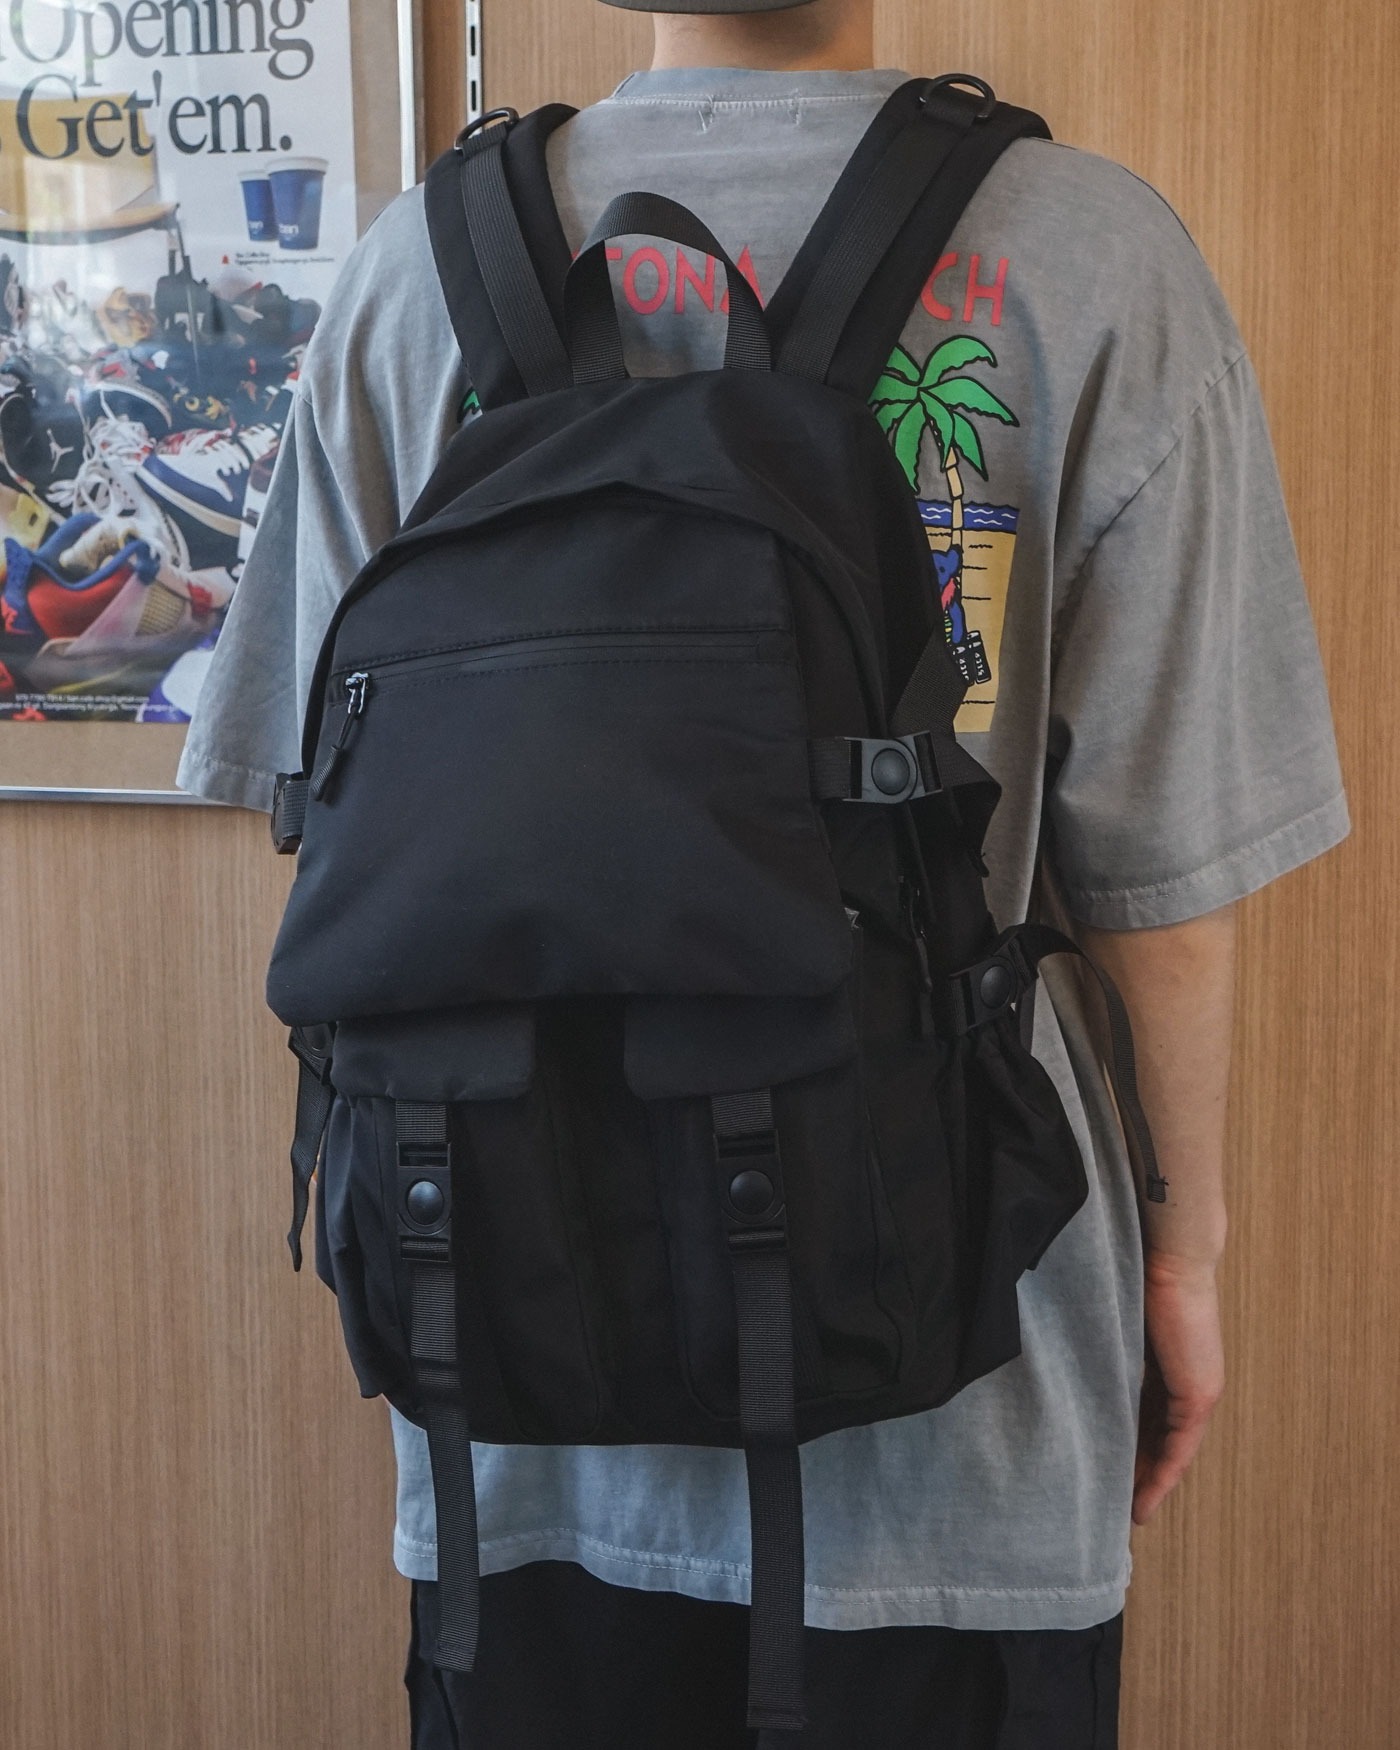 DOME BUTTON BACK PACK S230